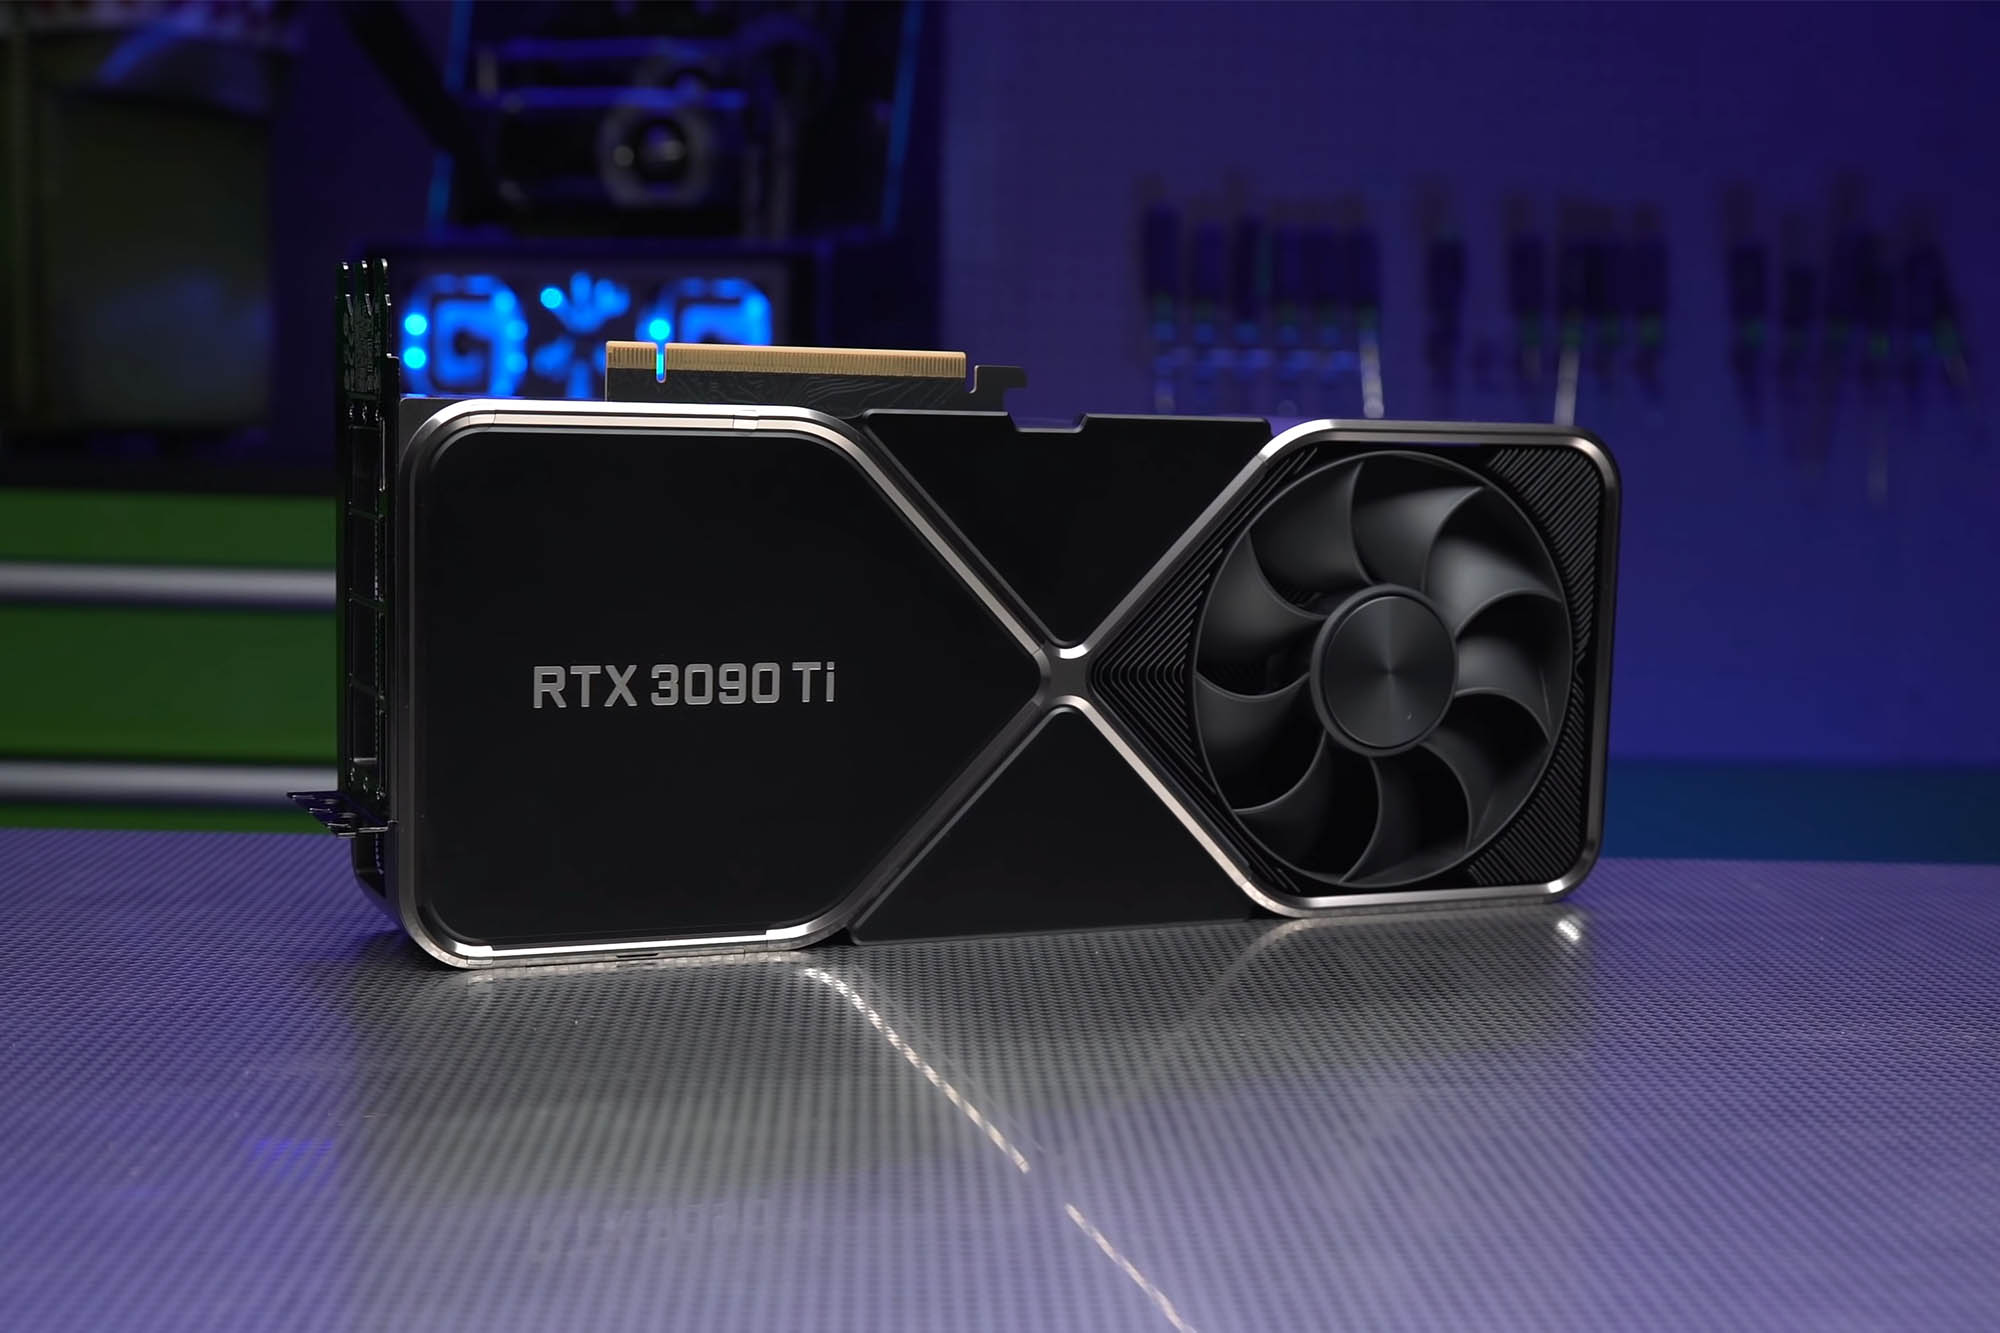 Prices for Nvidia's RTX 3090 Ti GPU are out of control